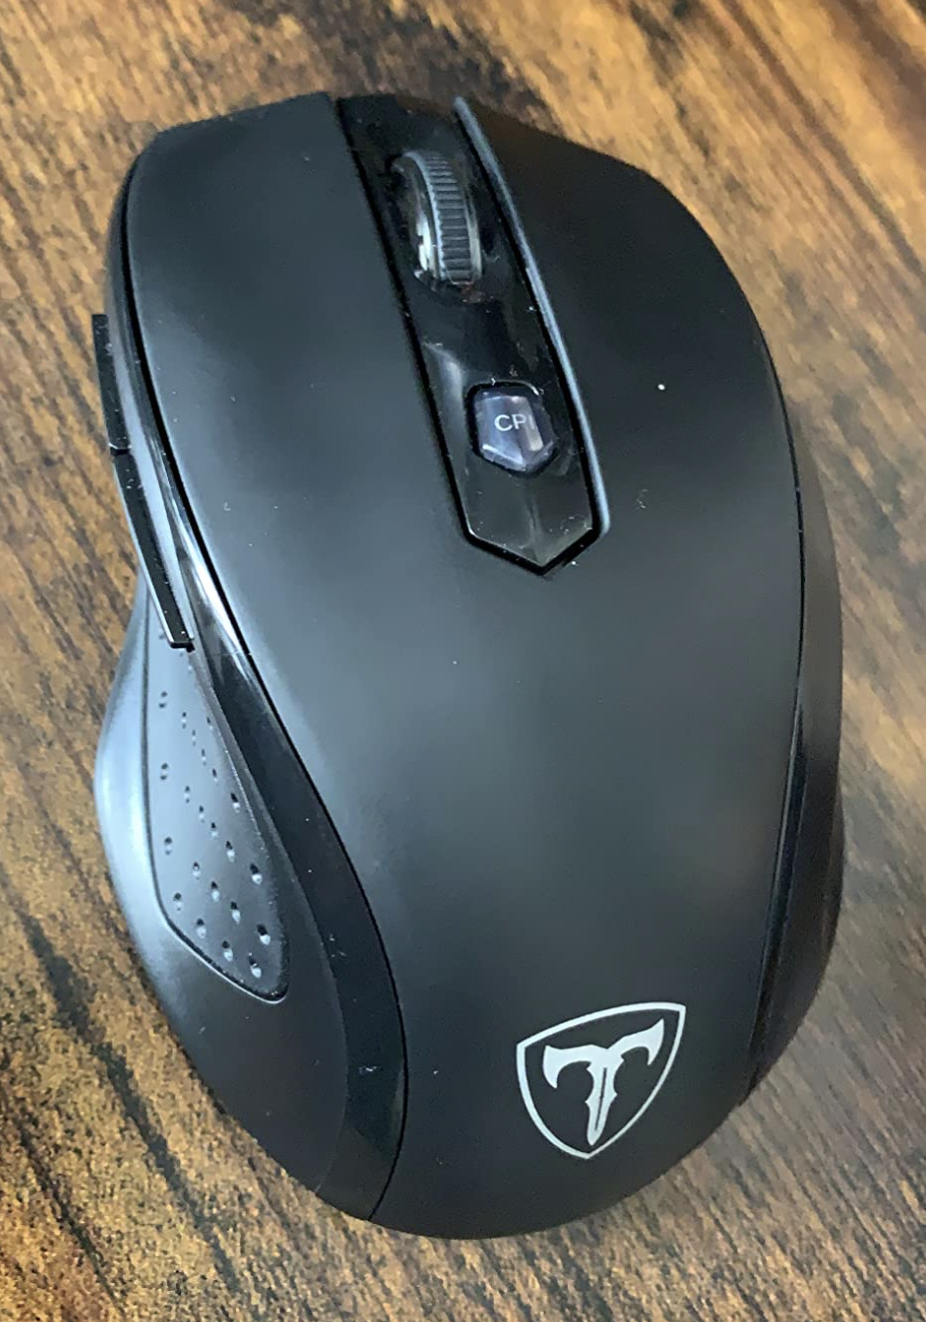 reviewer photo of the computer mouse